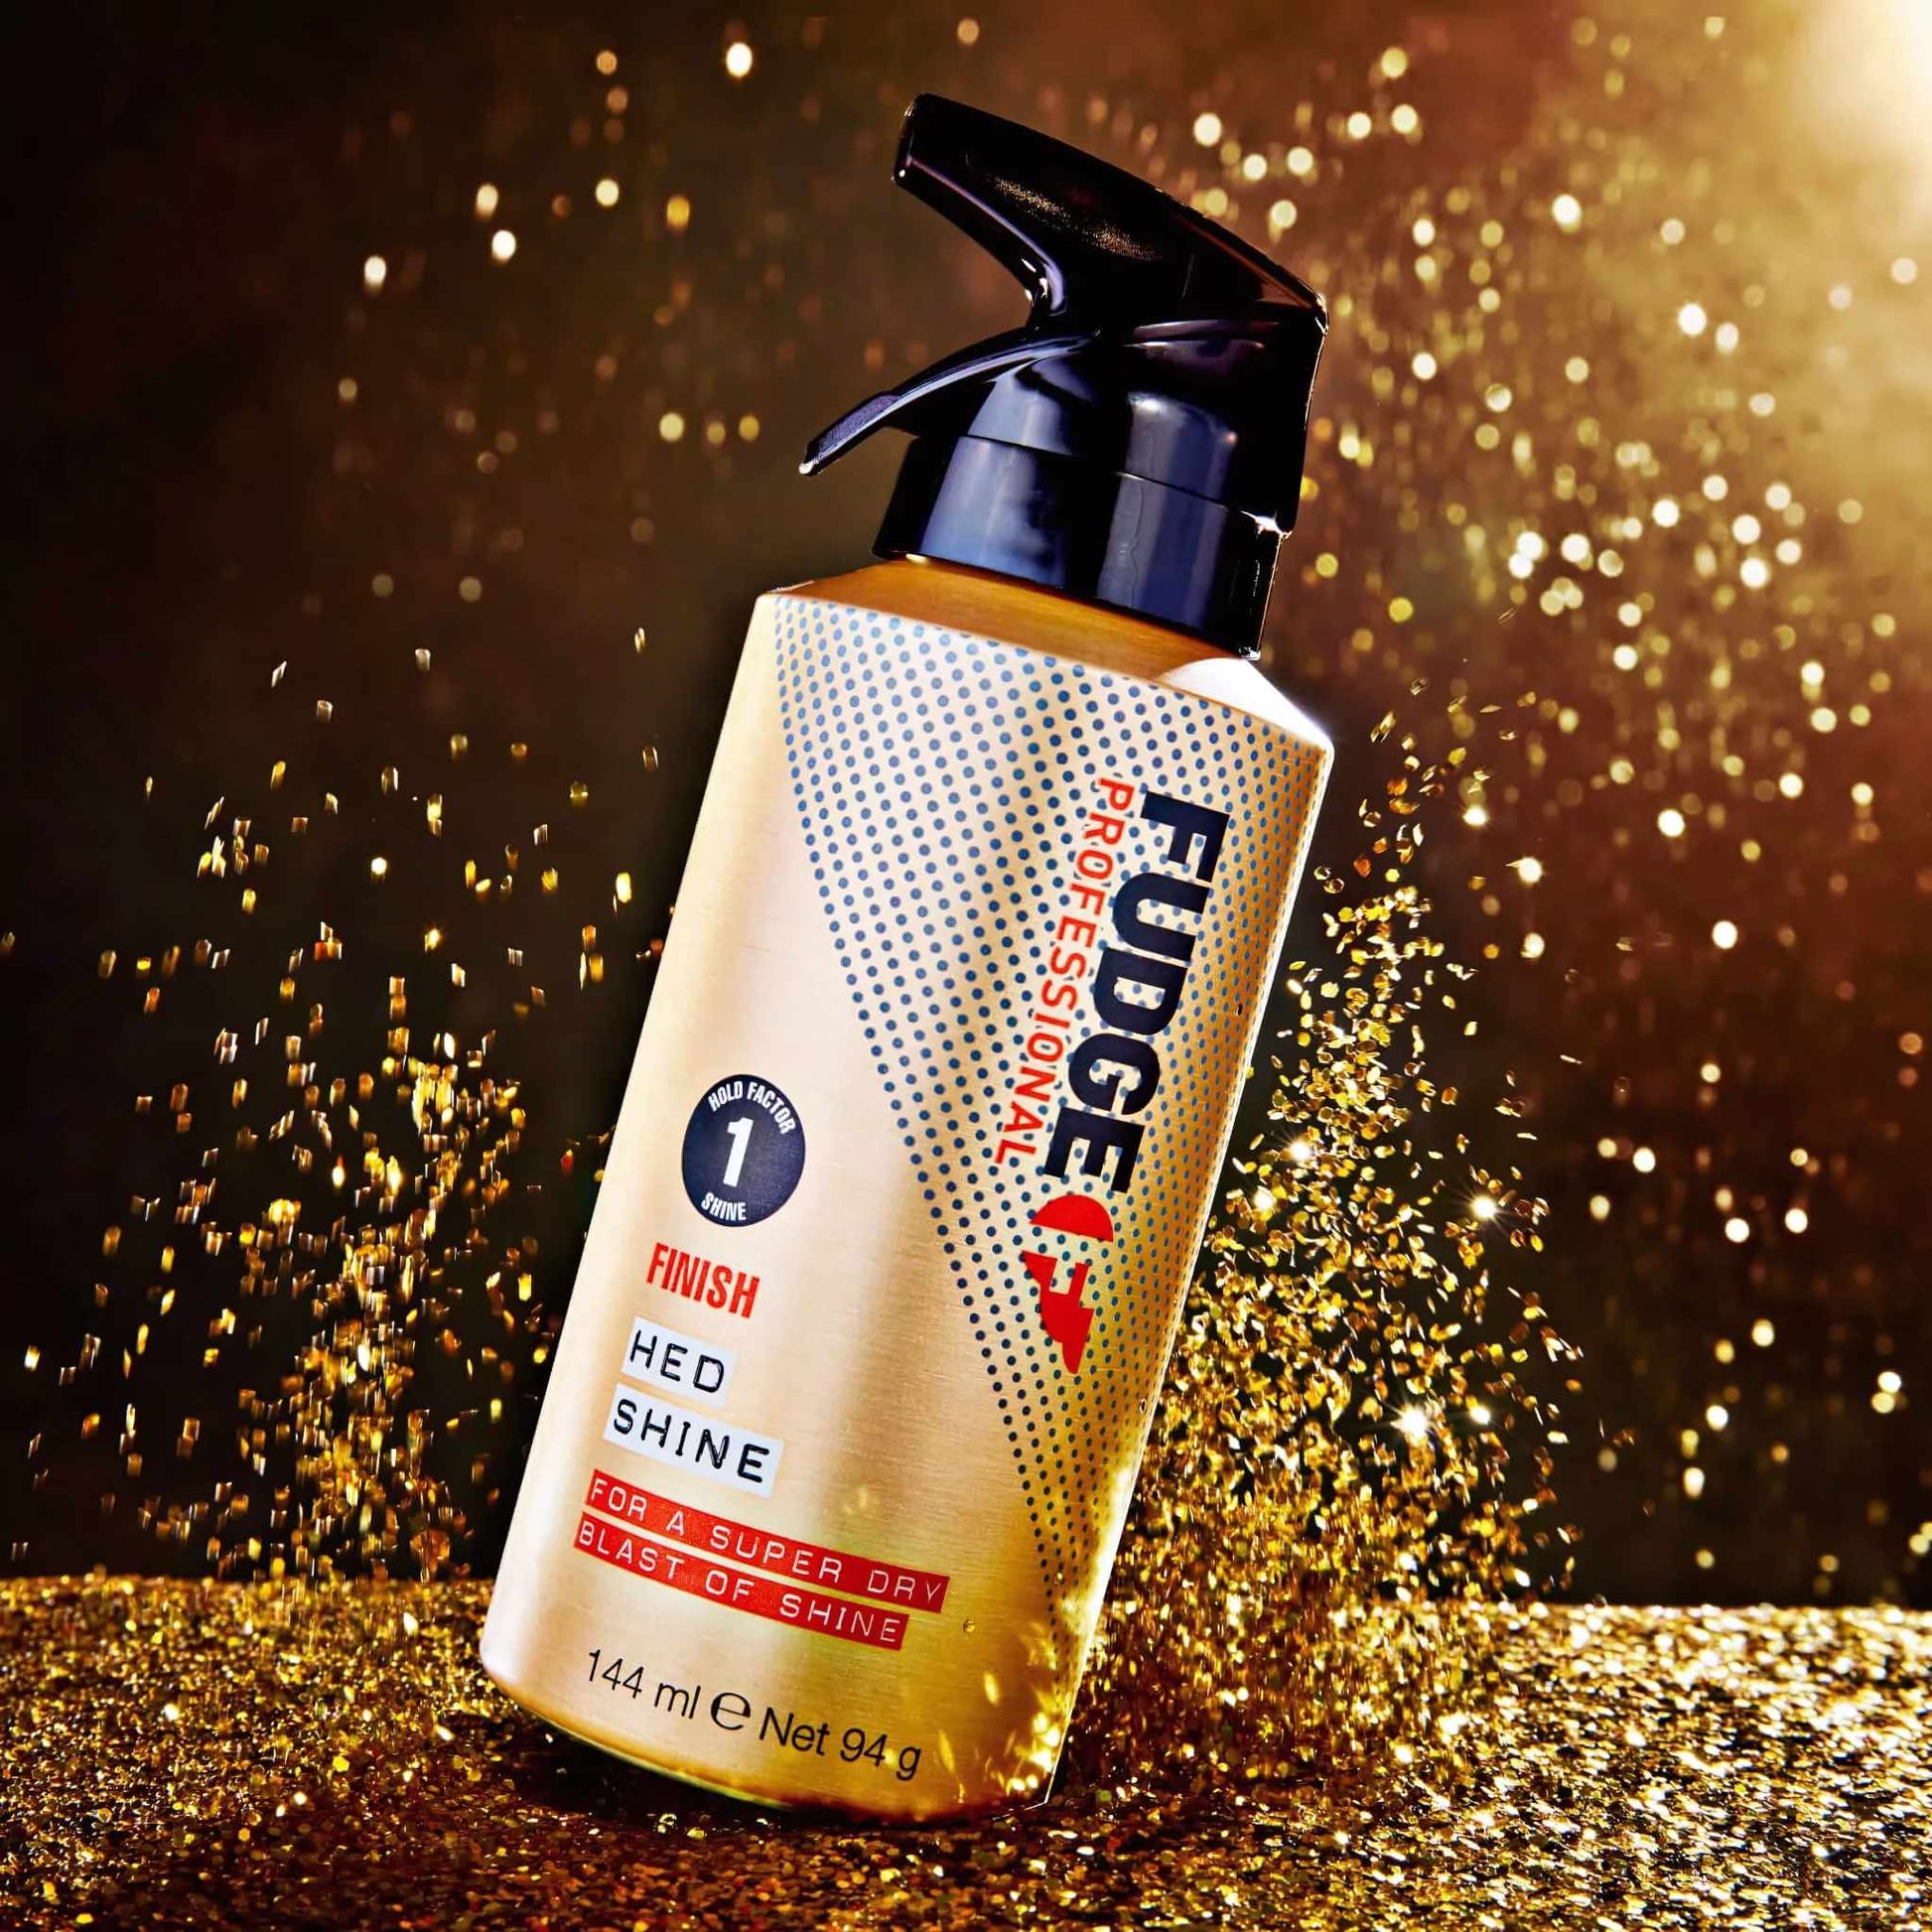 Fudge Styling Hed Shine Spray 144ml 82% felt this product made their hair the glossiest it has ever looked.